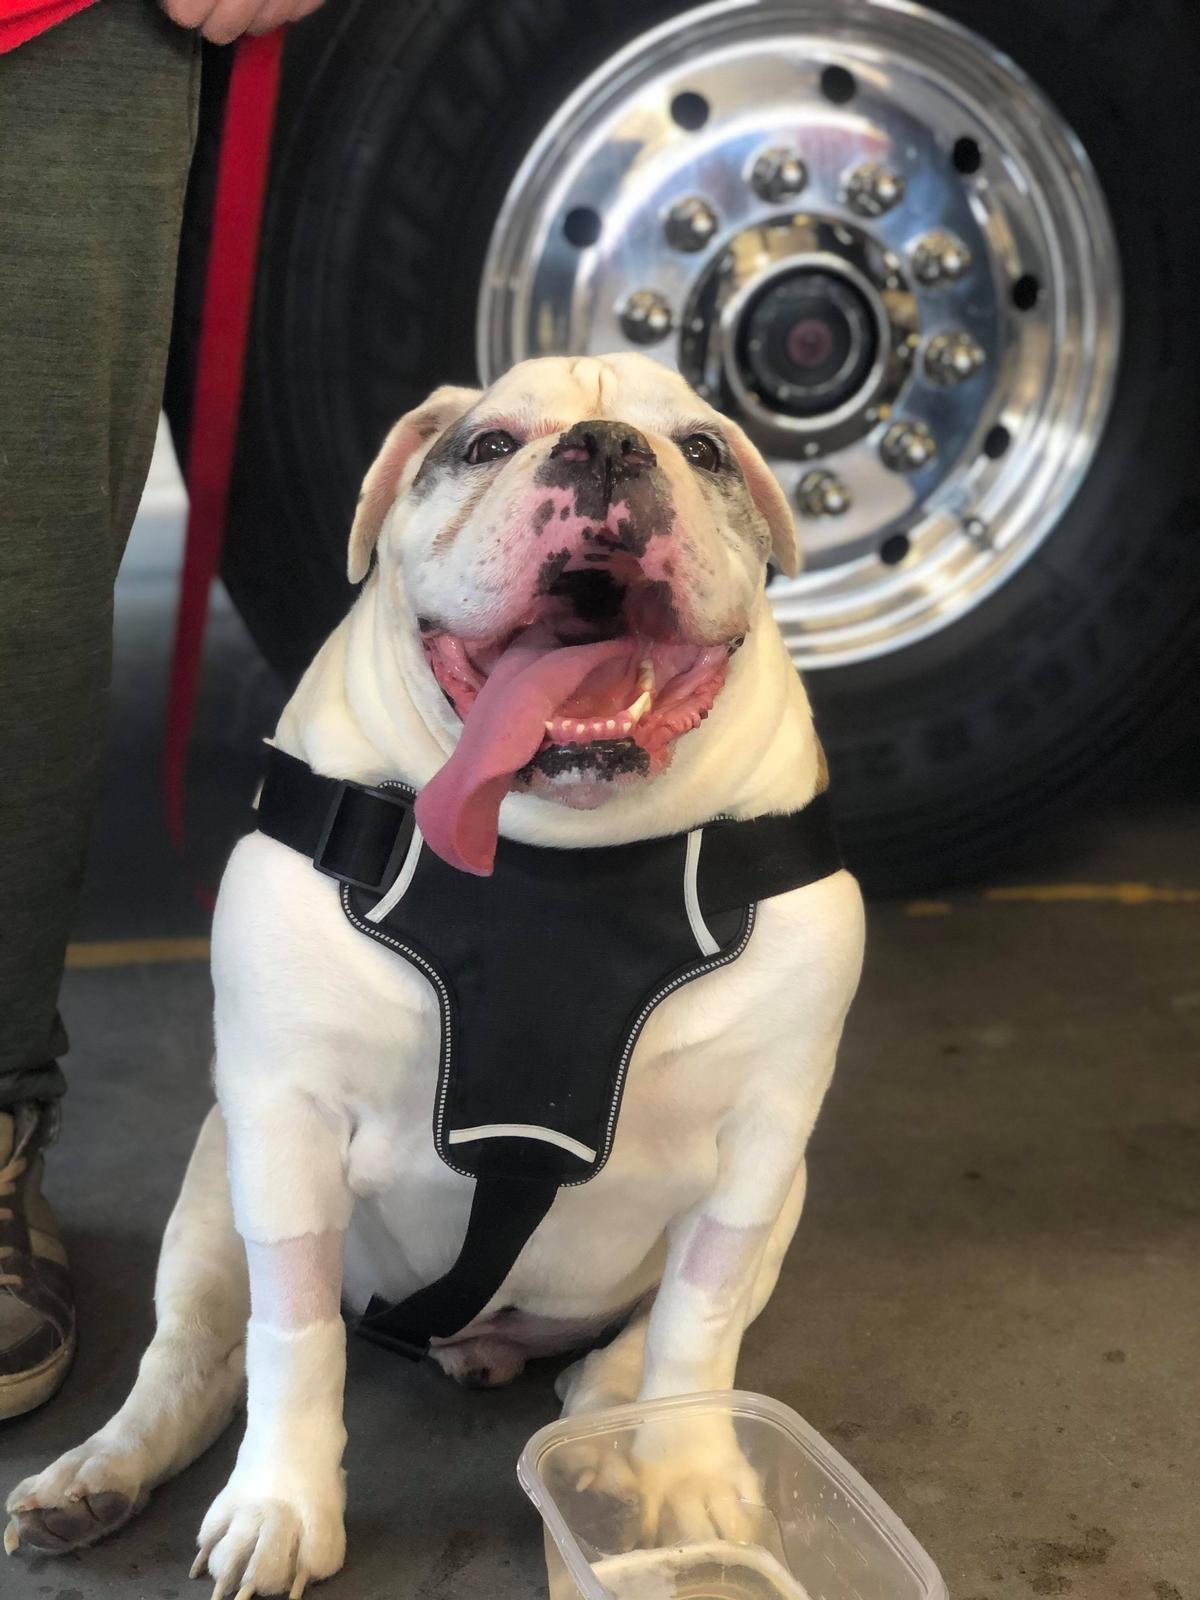 Samson at a reunion with the firefighters who saved his life. (Courtesy of <a href="https://www.facebook.com/ybboreel">Rob Lee</a>)